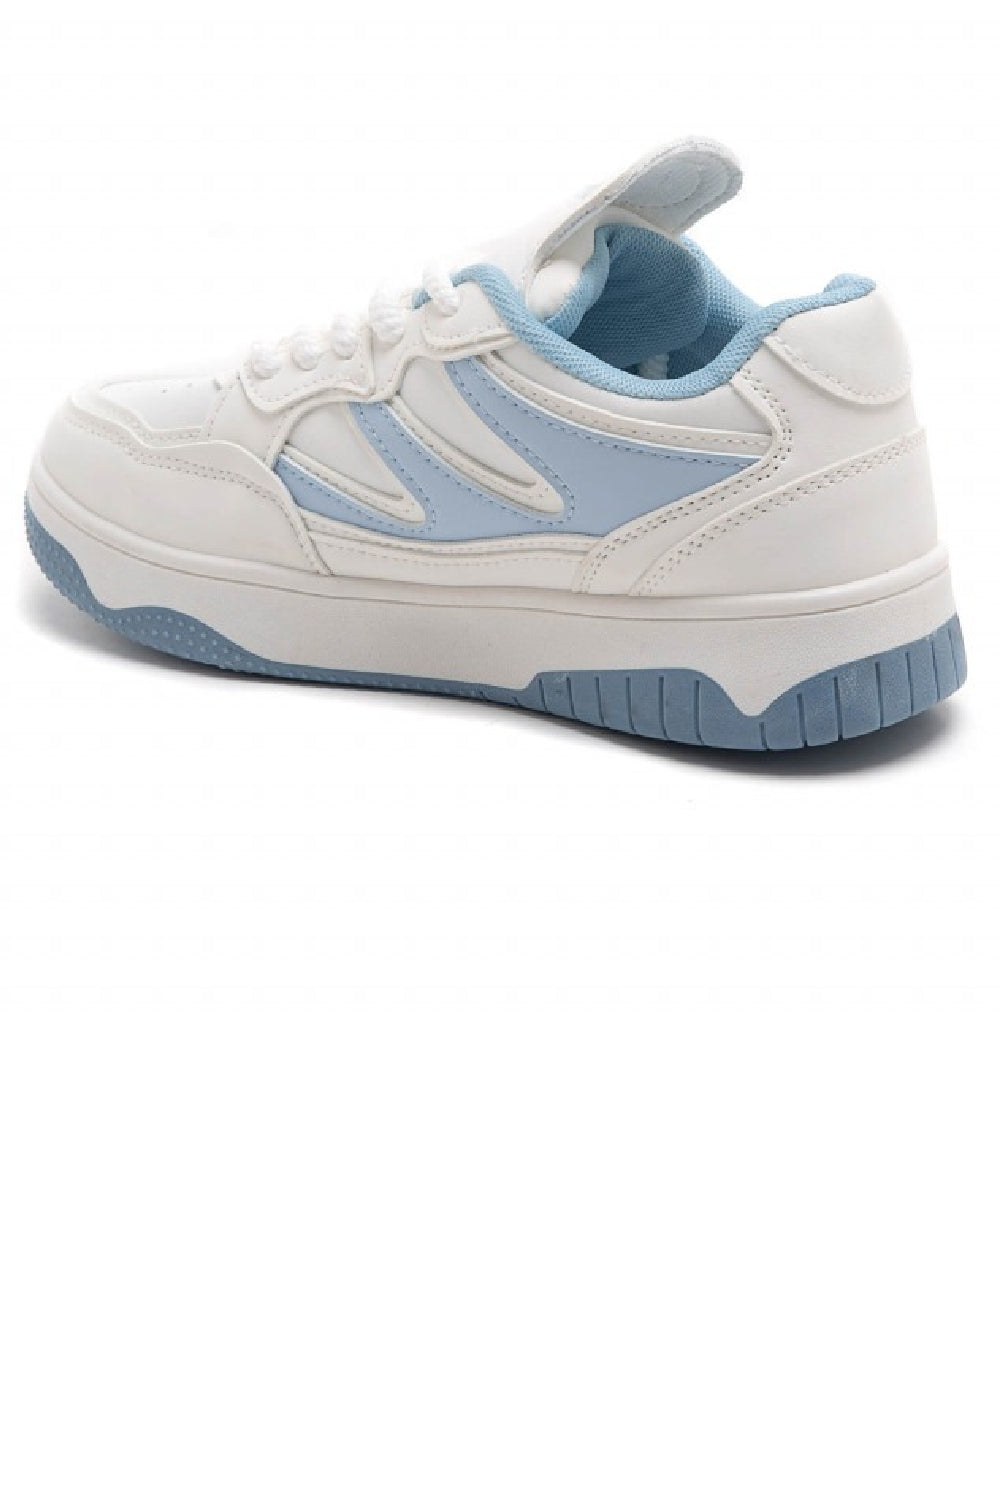 WHITE BLUE LACE UP FLAT CHUNKY FASHION SNEAKERS TRAINERS